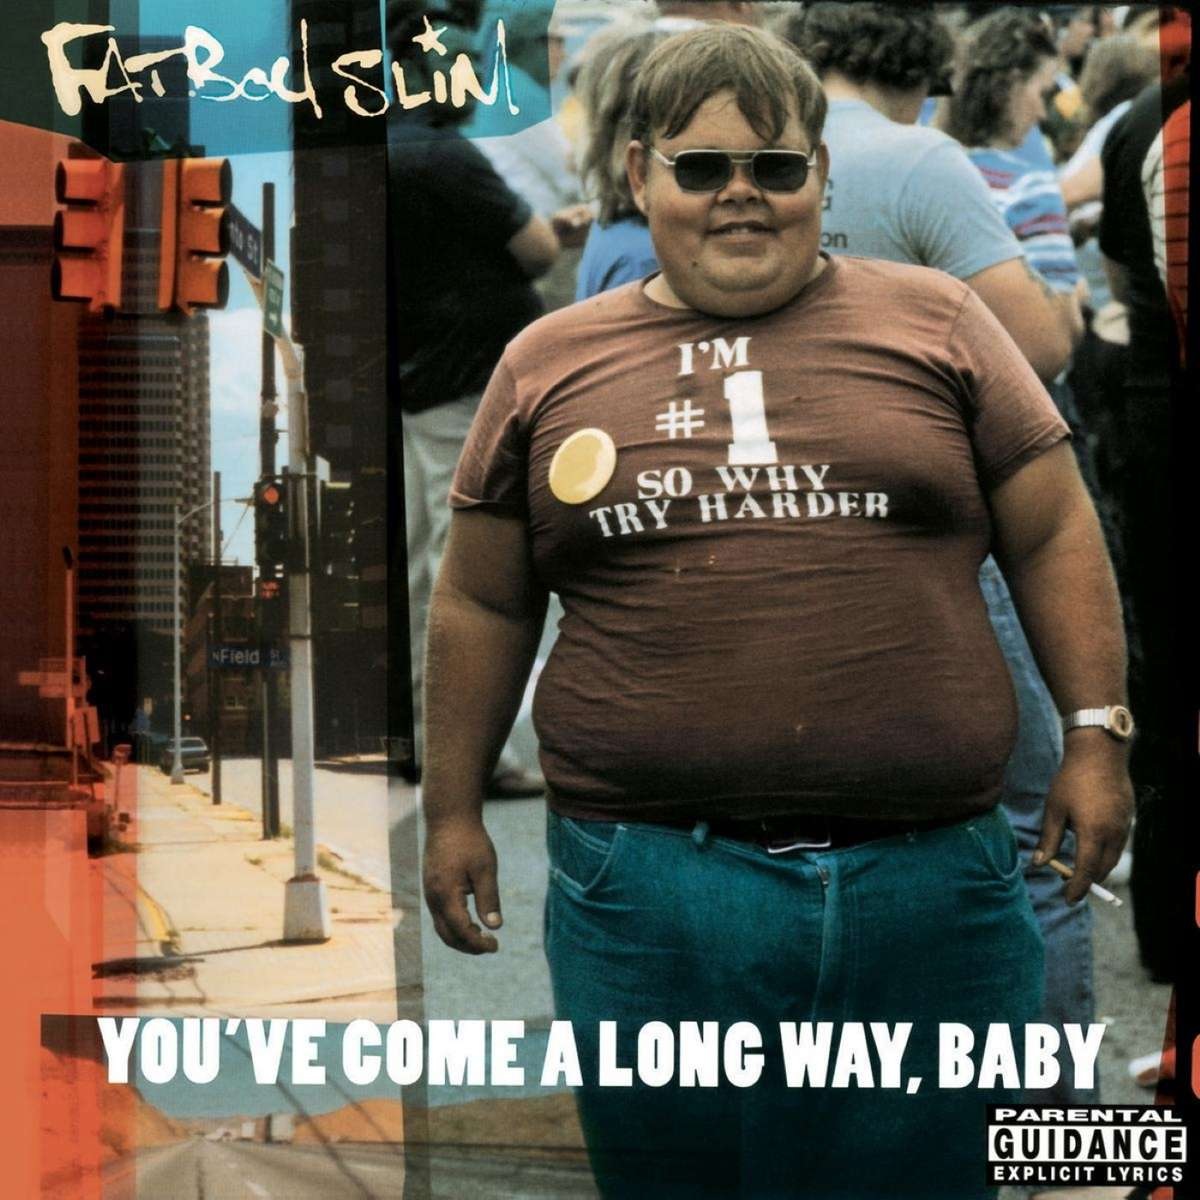 Электроника BMG Rights Fatboy Slim - You've Come a Long Way, Baby (Black Vinyl 2LP) электроника sony fatboy slim halfway between the gutter and the stars black vinyl 2lp